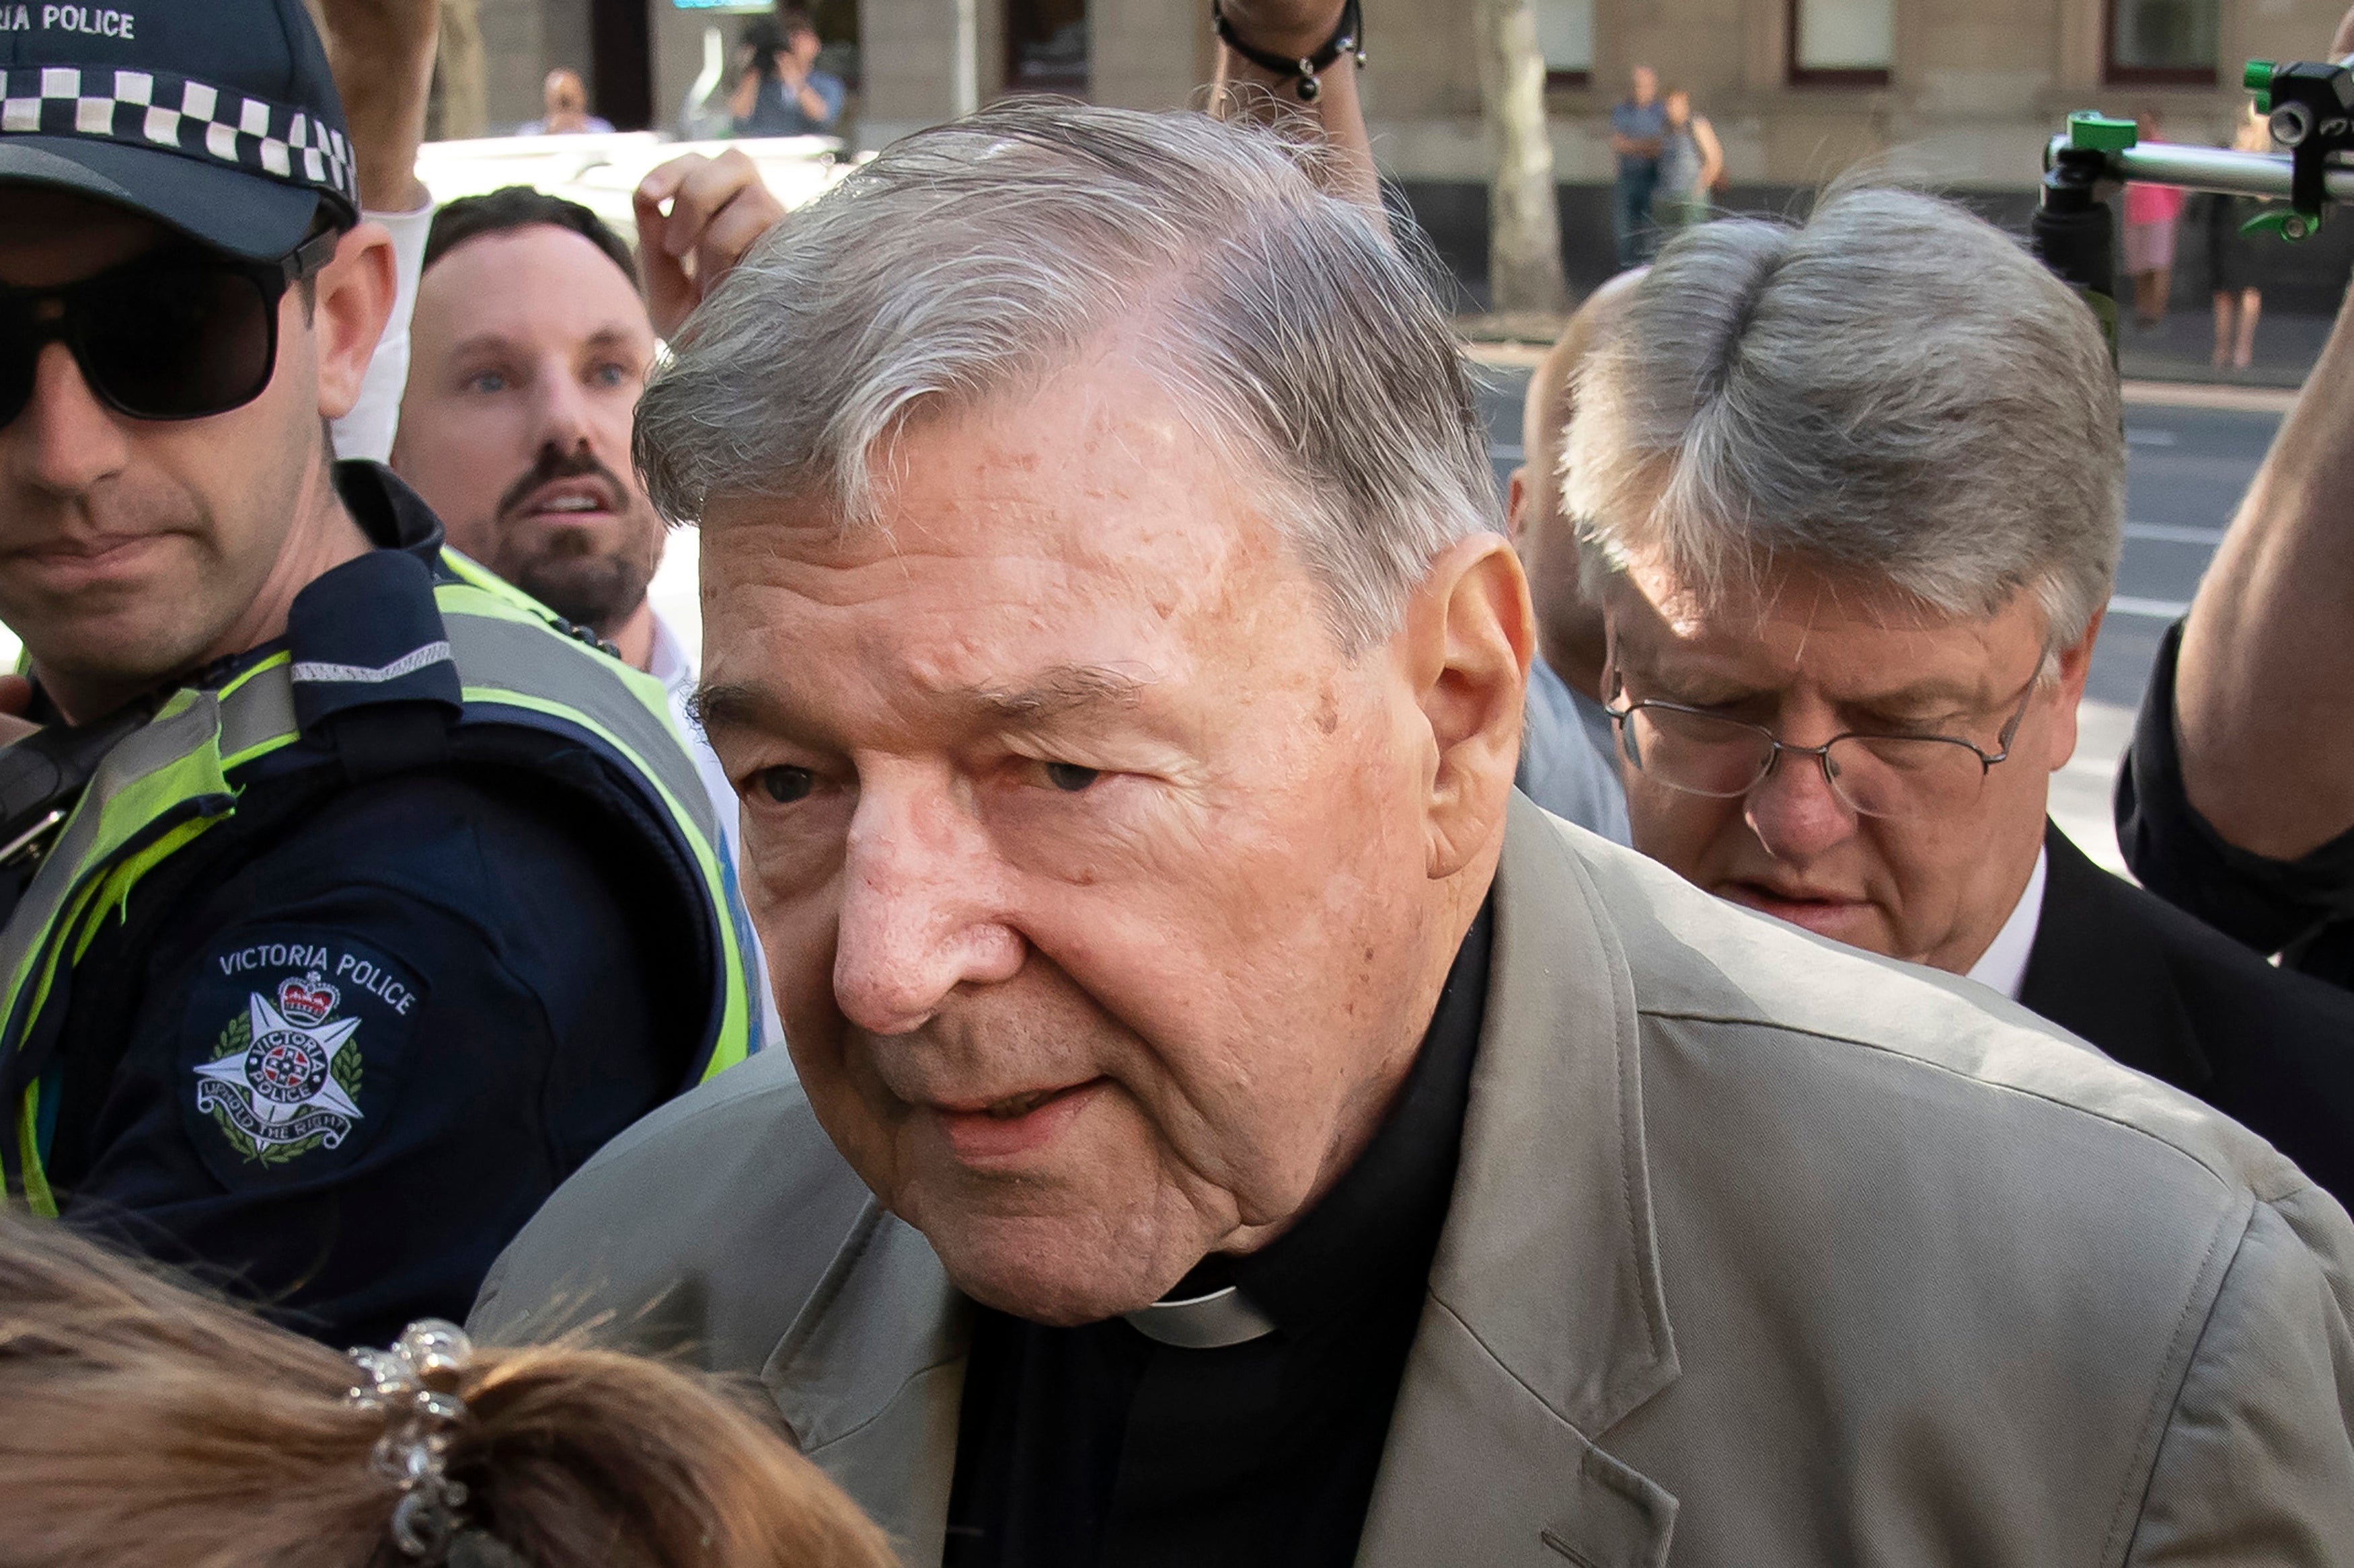 Cardinal George Pell arrives at the County Court in Melbourne, Australia, on 4 June 2021